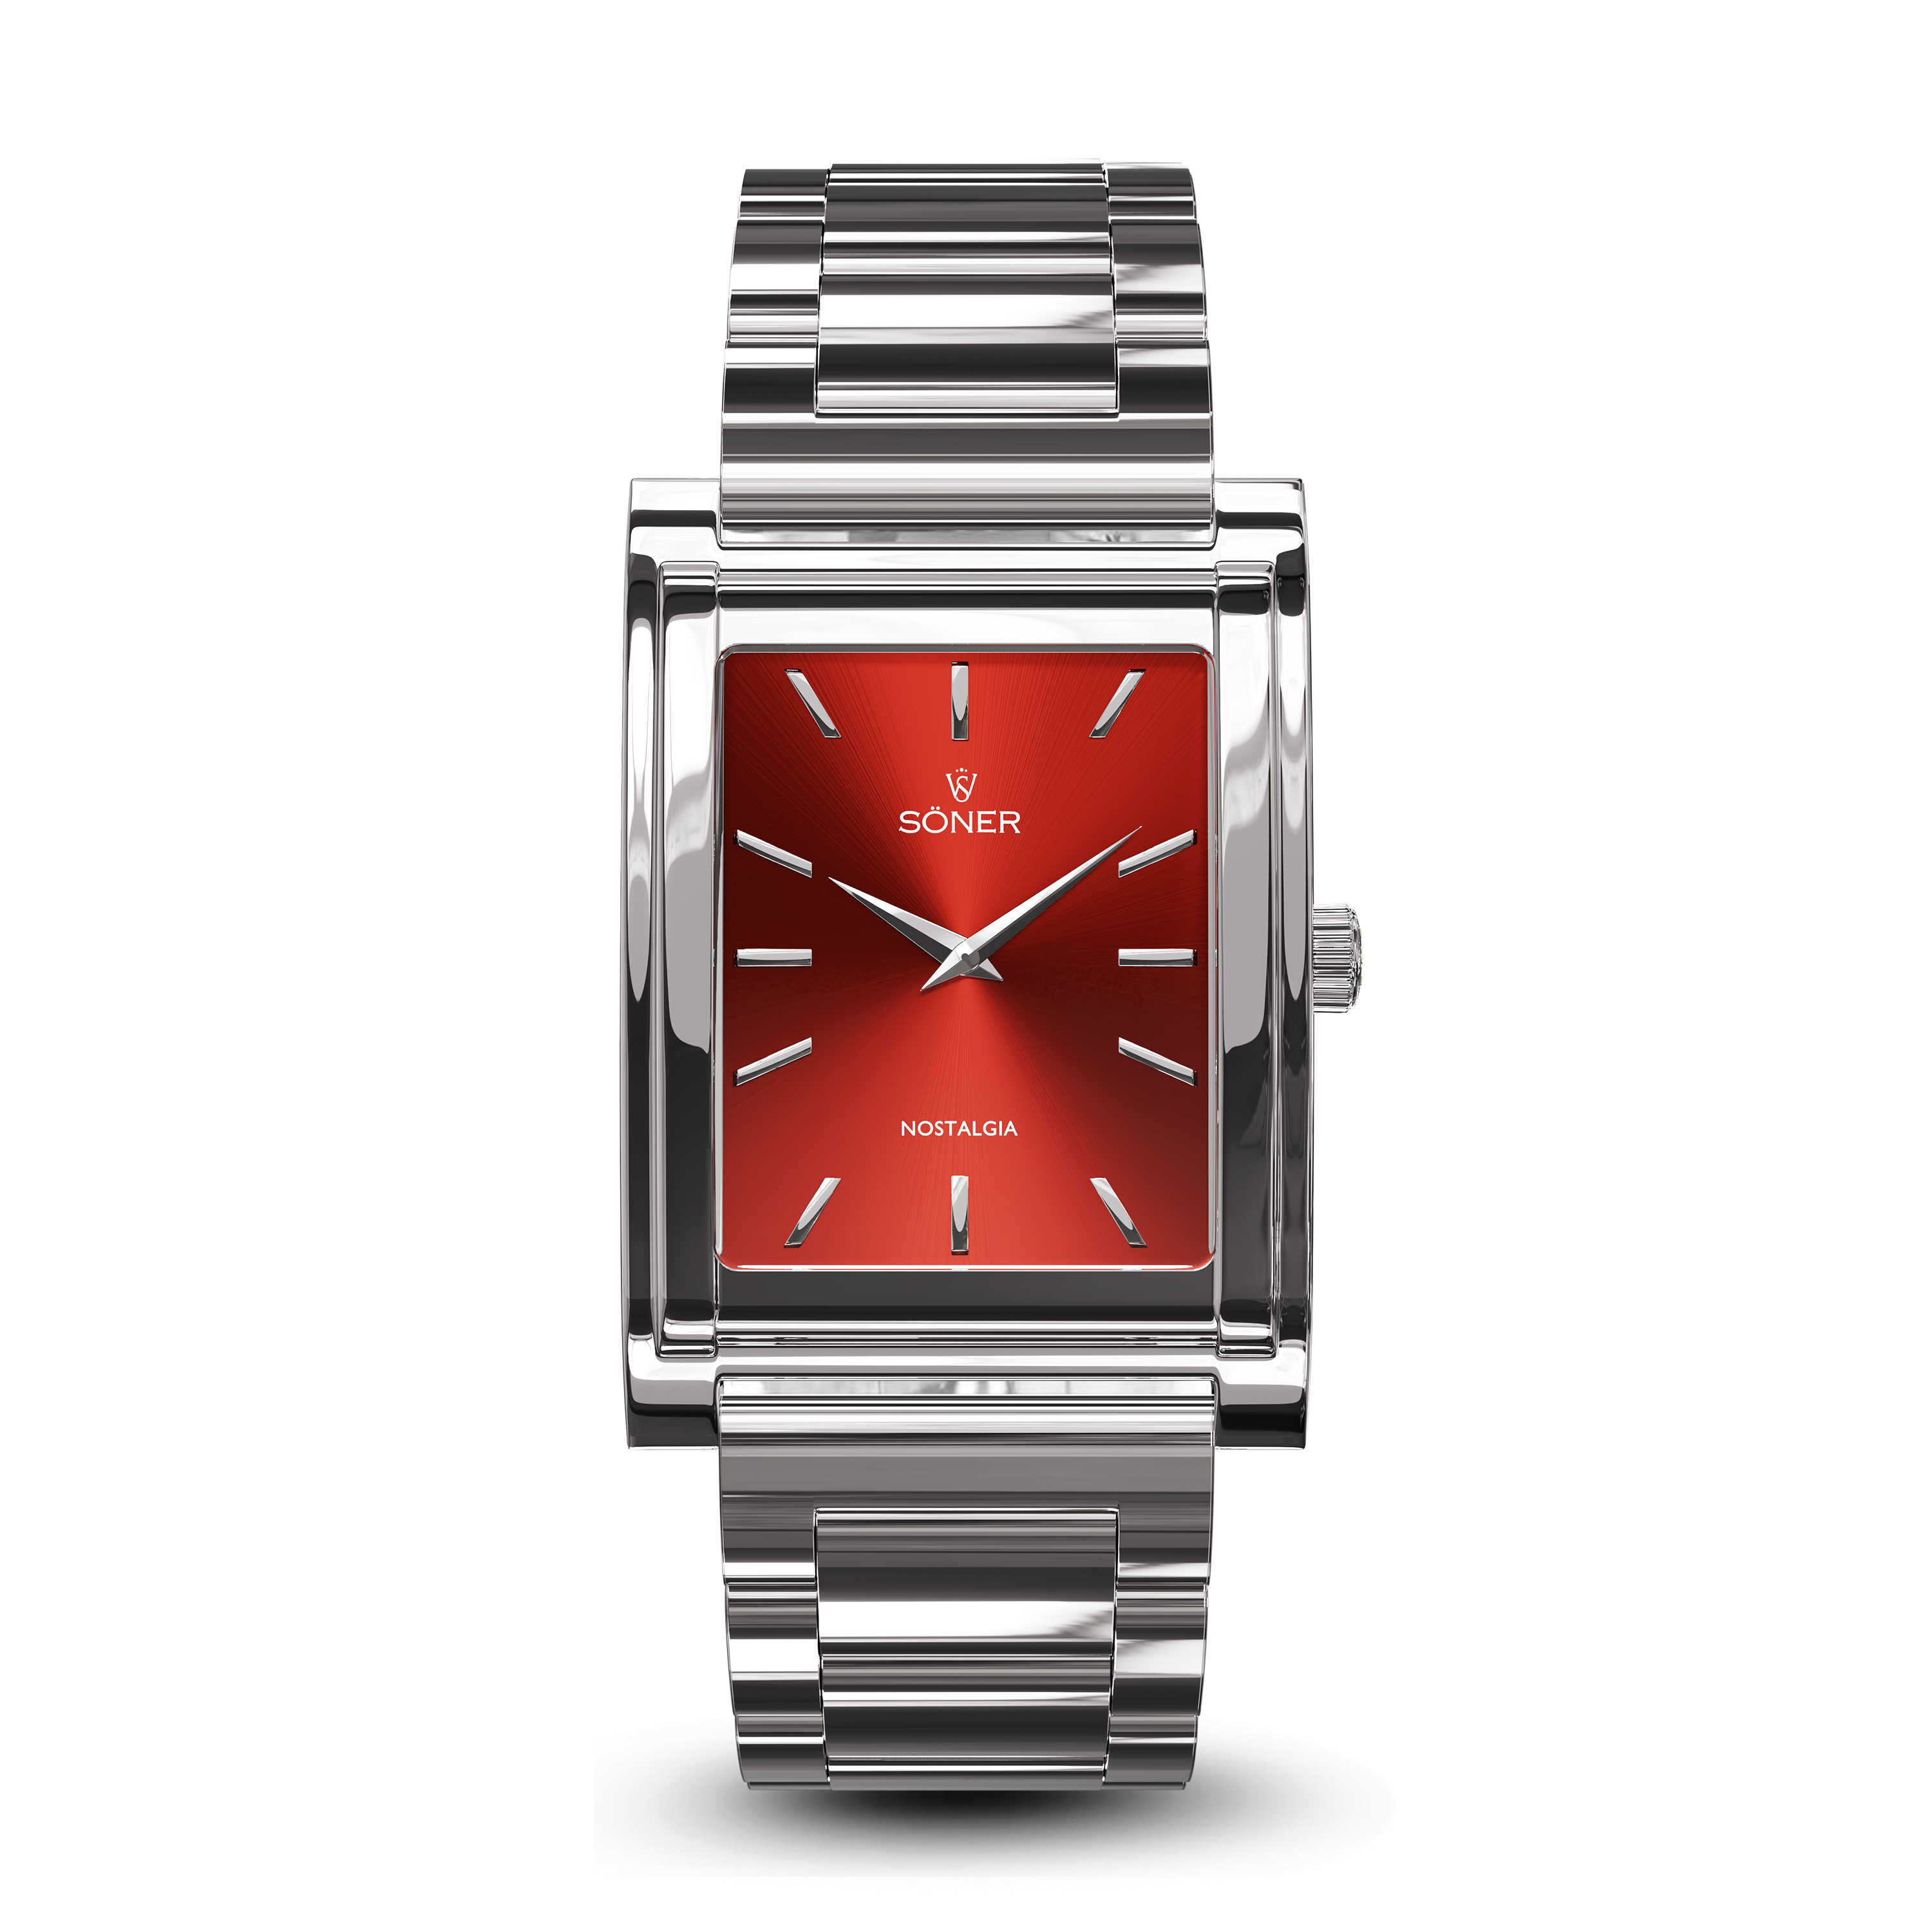 Square watch, Nostalgia Rome white red dial - steel bracelet front view